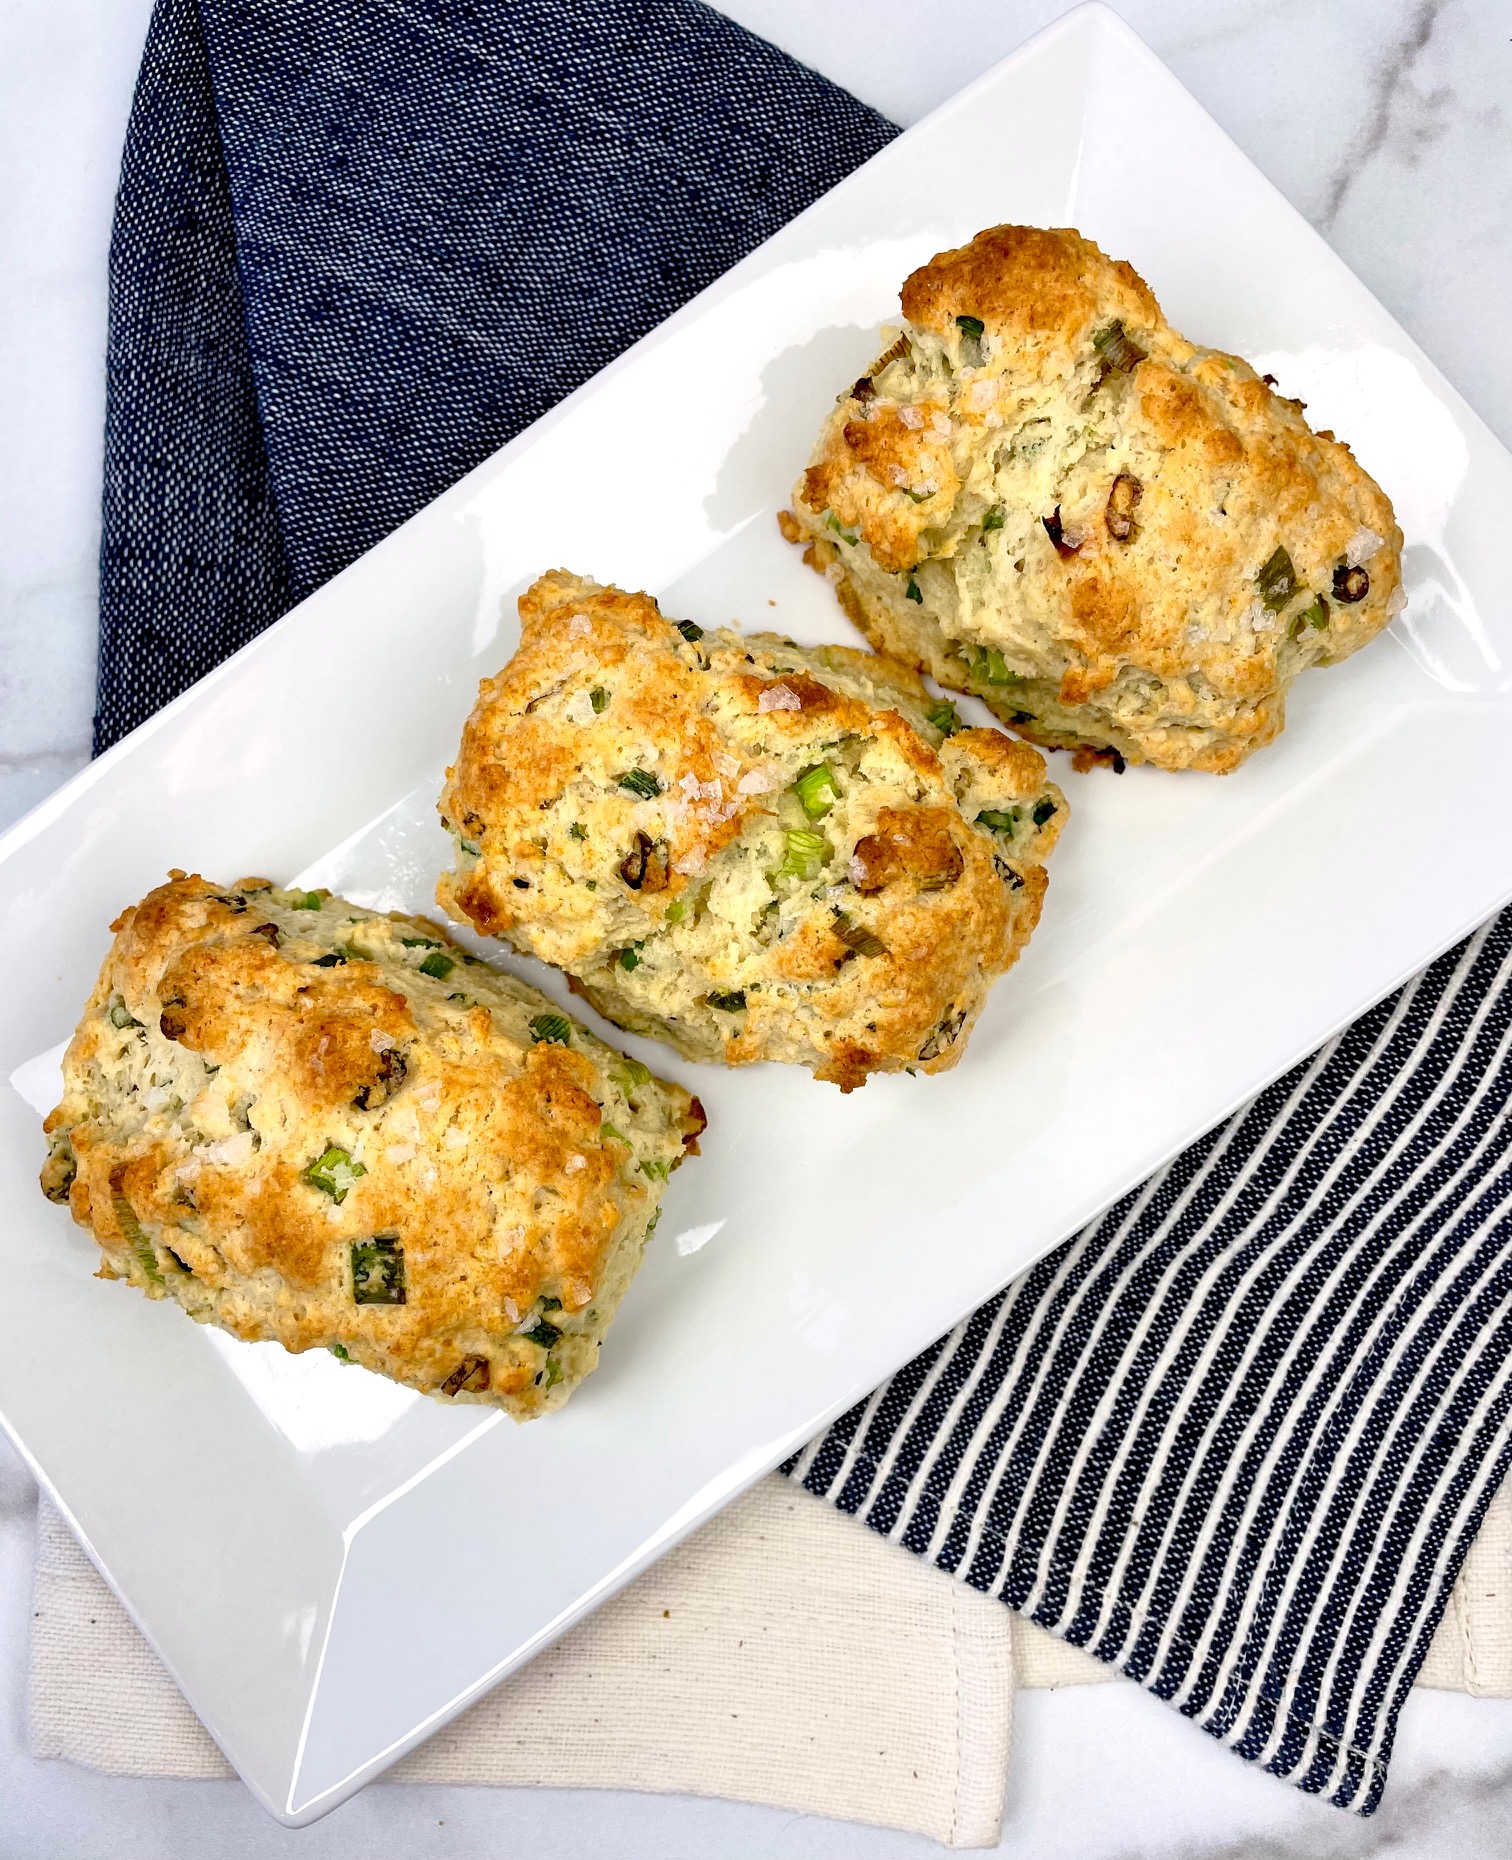 Sour Cream and Scallion Biscuits